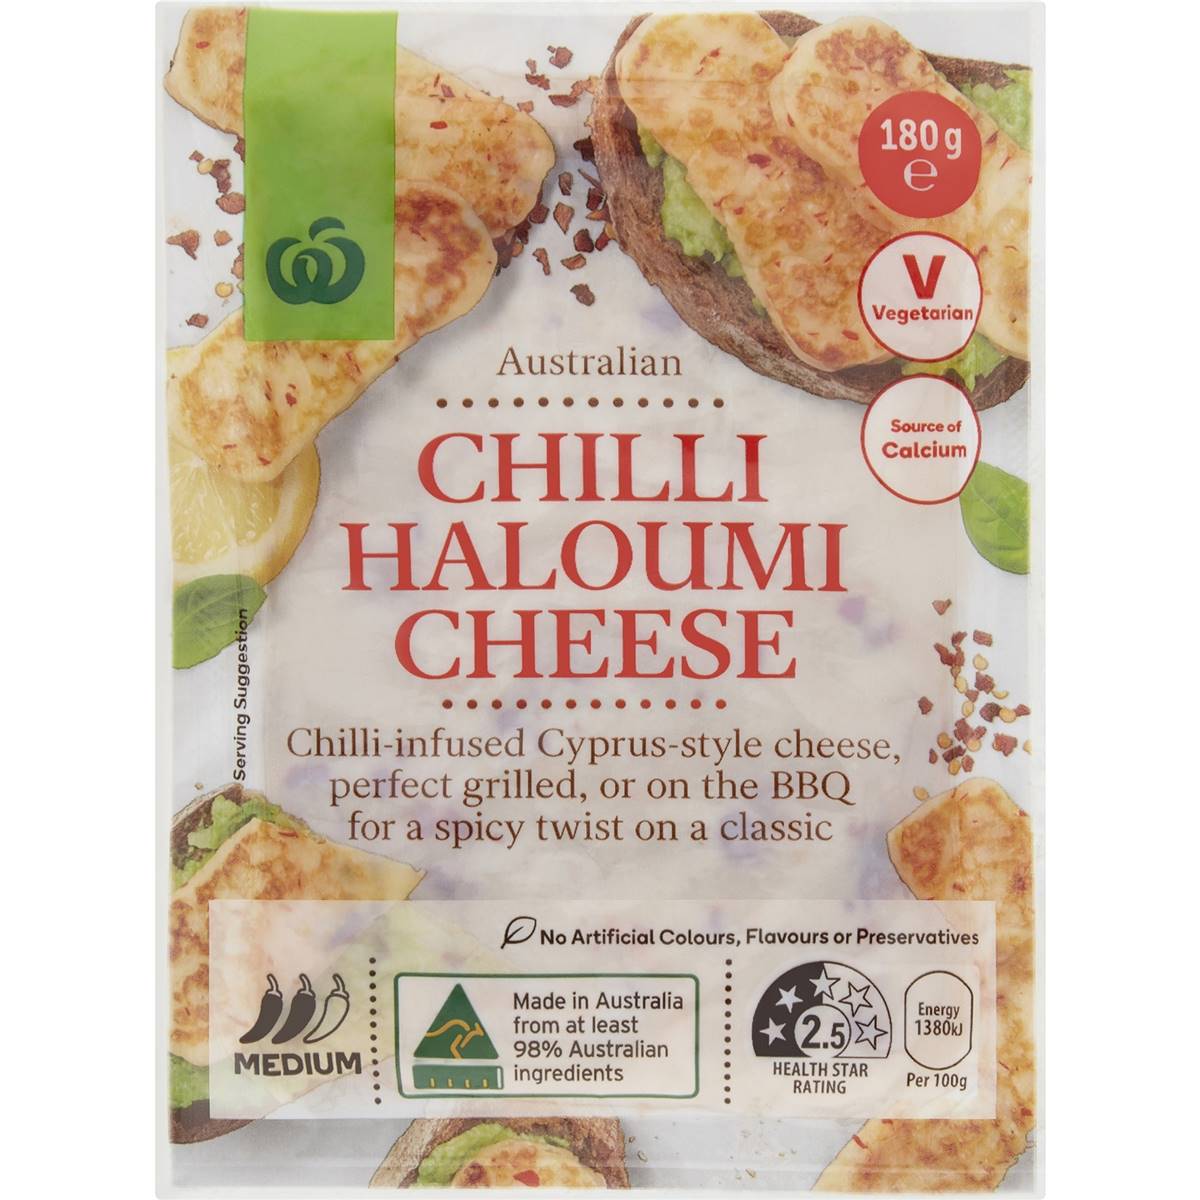 Calories in Woolworths Chilli Haloumi Cheese